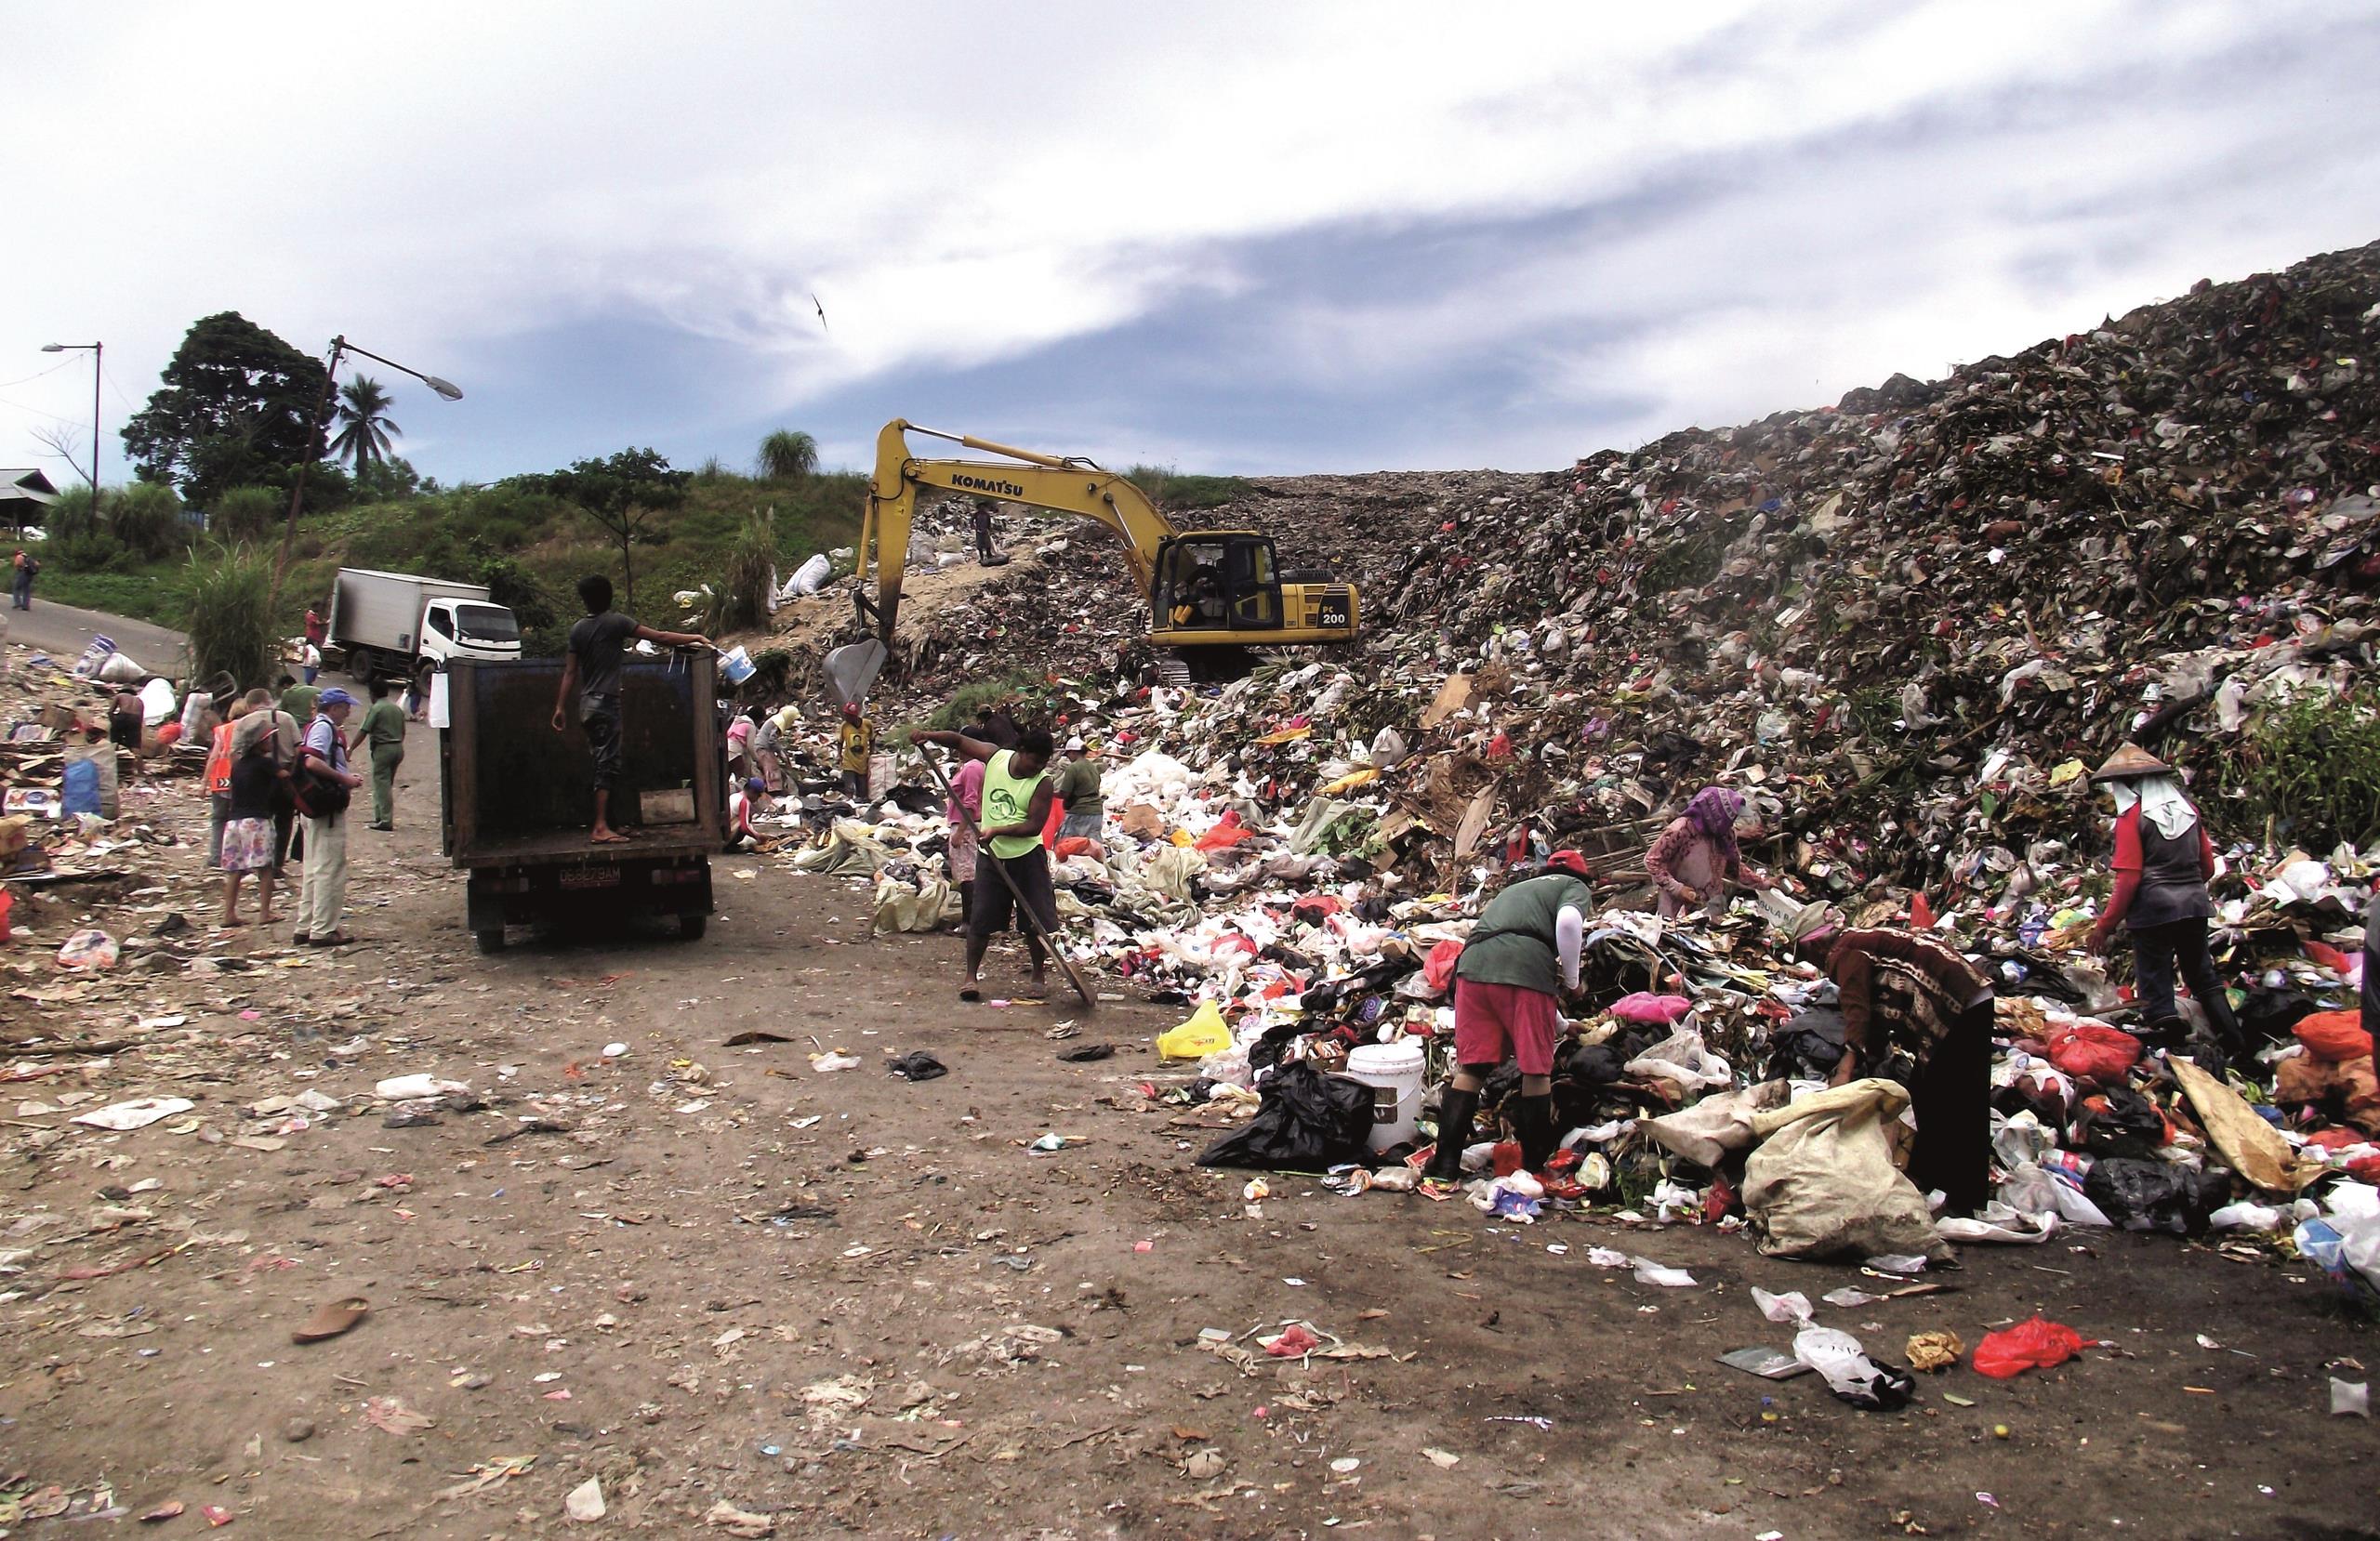 Workers removing low value items (Plastic bottles) at the Manado landfill site